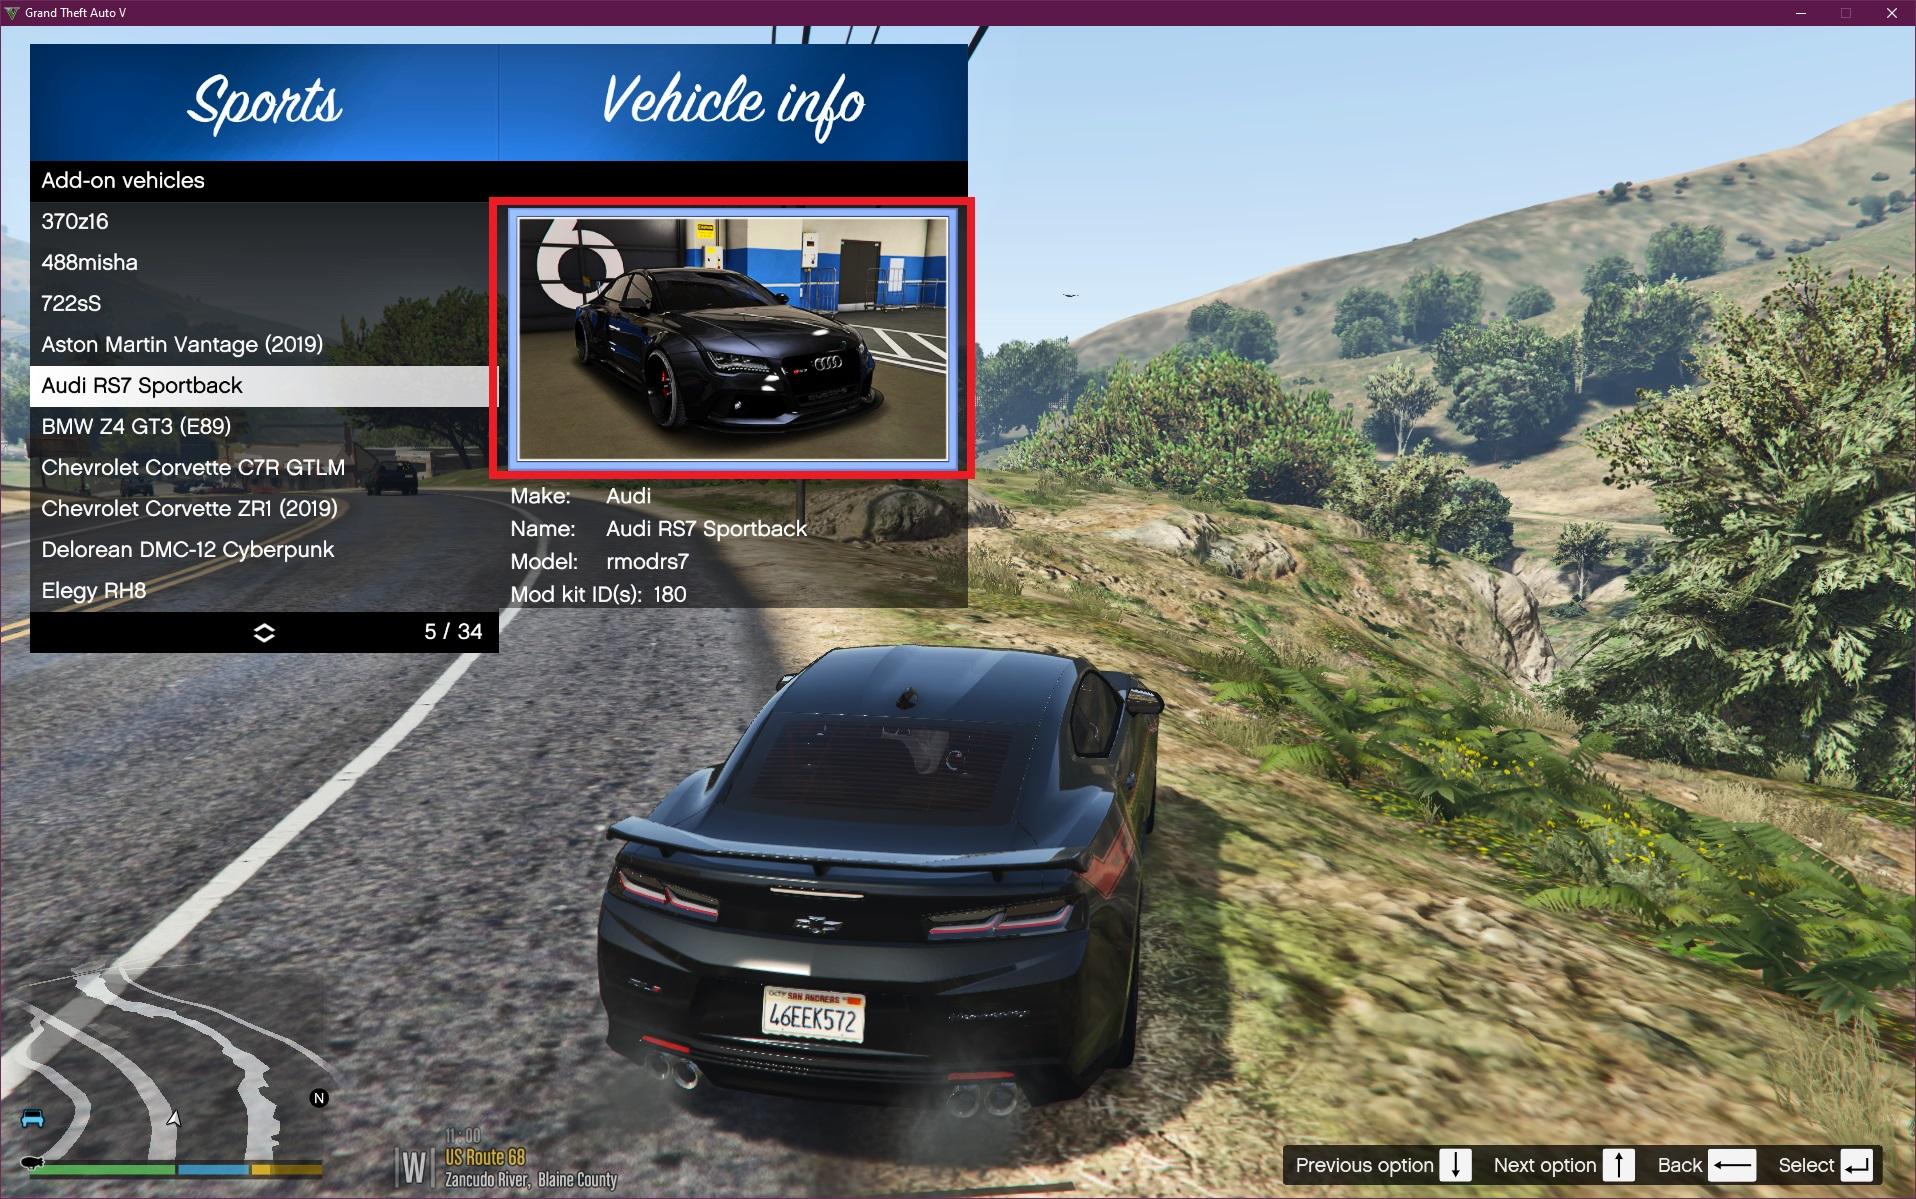 I Made GTA 6 Leaked Footage Gameplay Graphics in GTA 5 with just 1 Graphics  Mod 